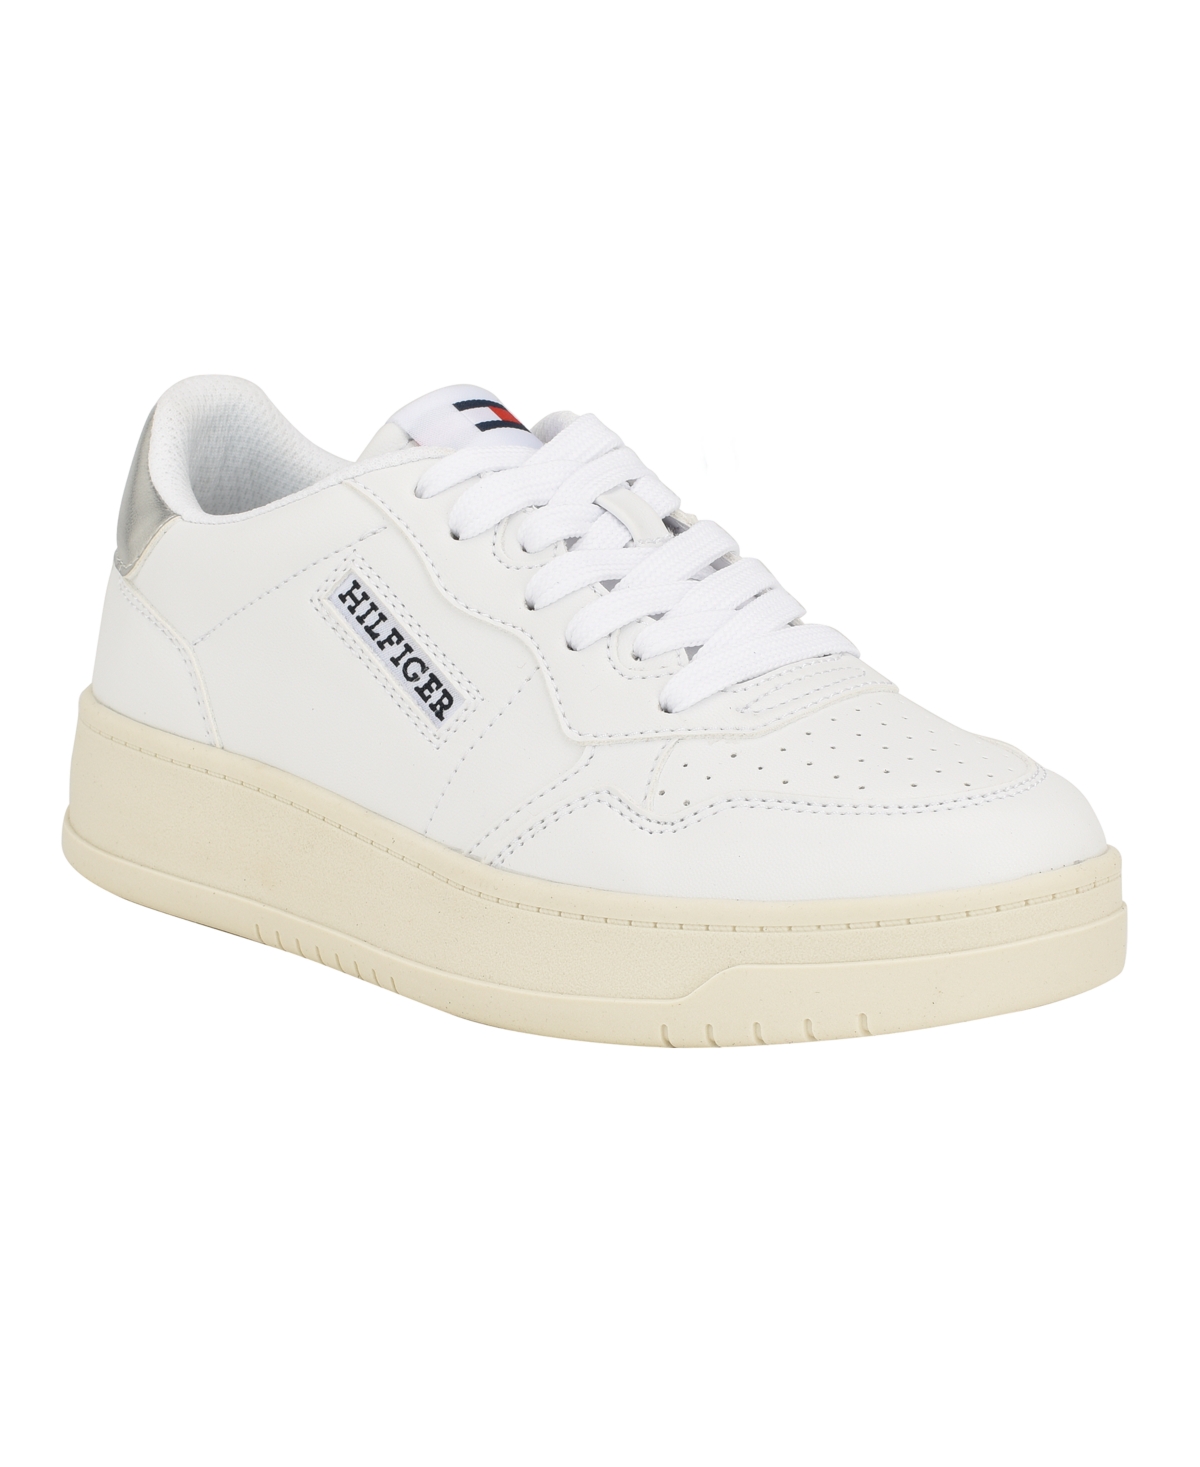 Women's Dunner Casual Lace Up Sneakers - White